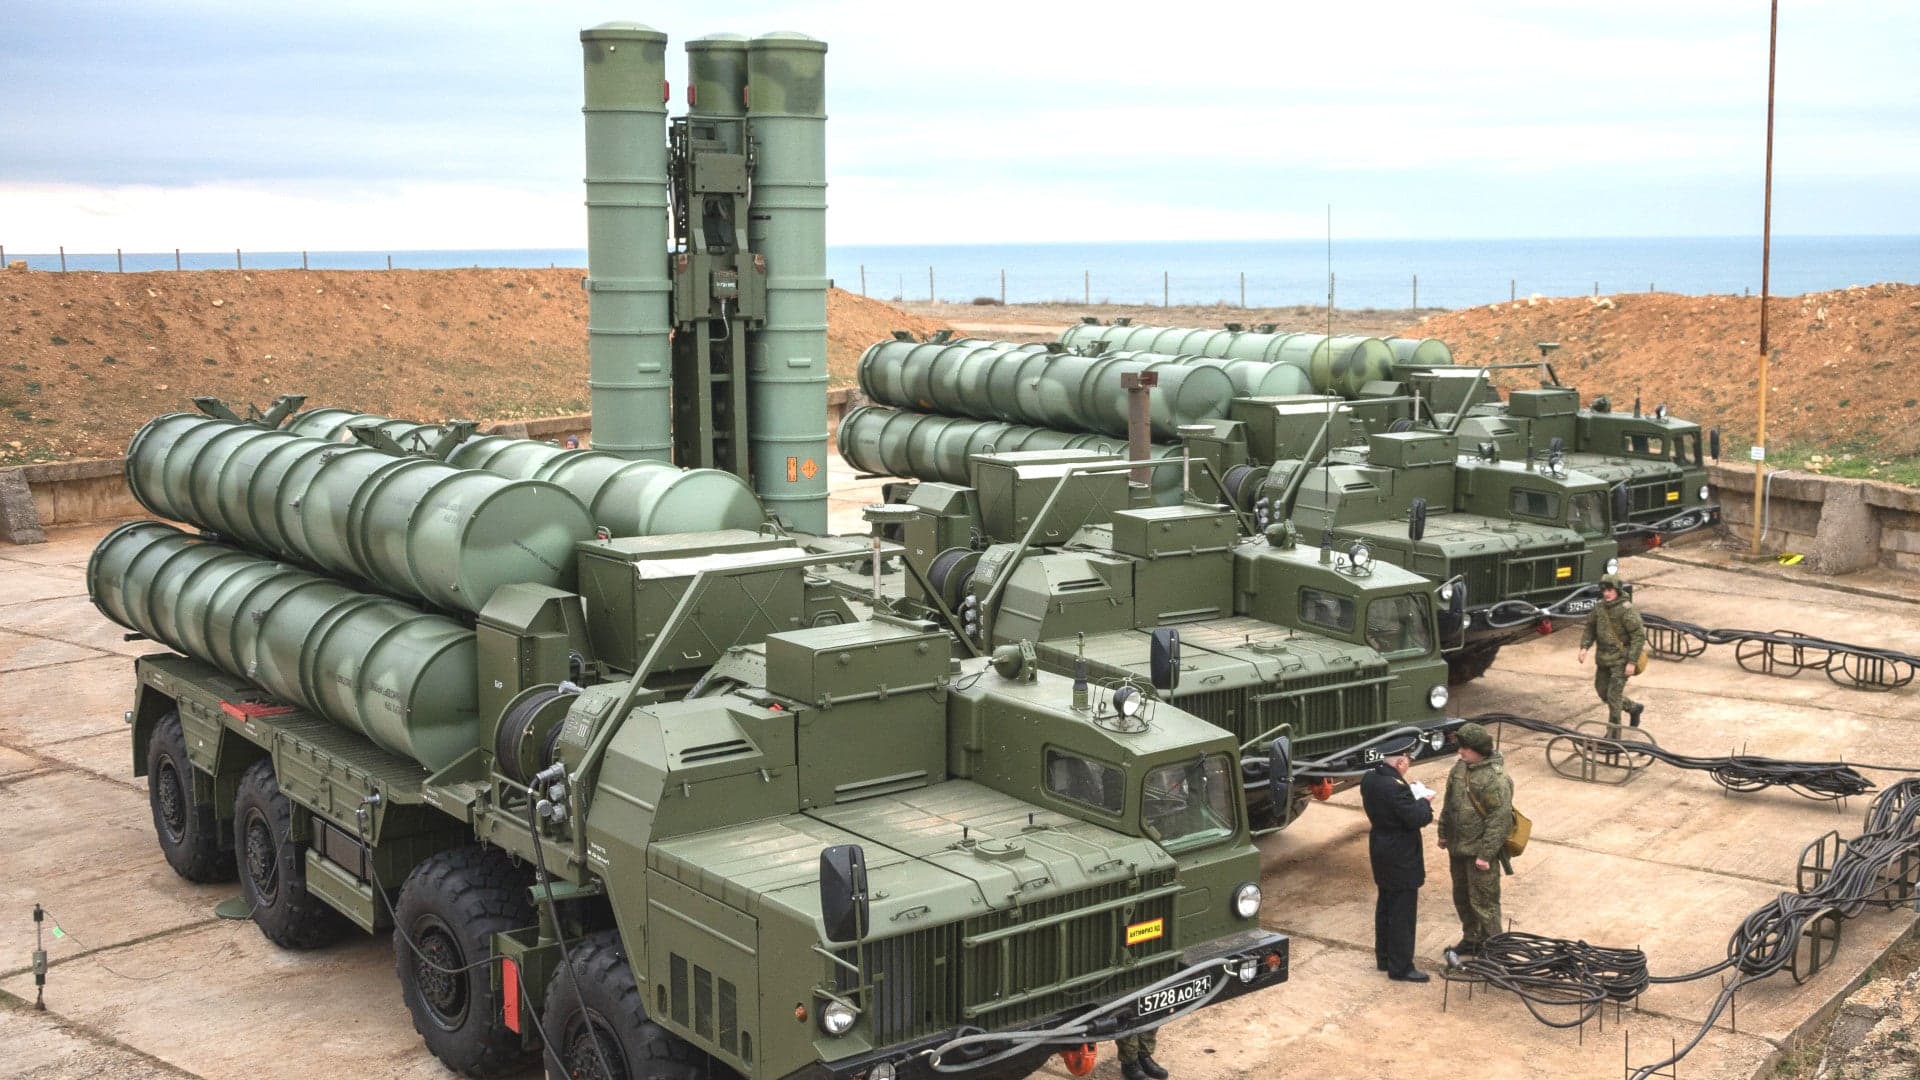 Russia Re-ups Offer To Arm Iraq With S-400 Air Defenses As Relations With The U.S. Sour